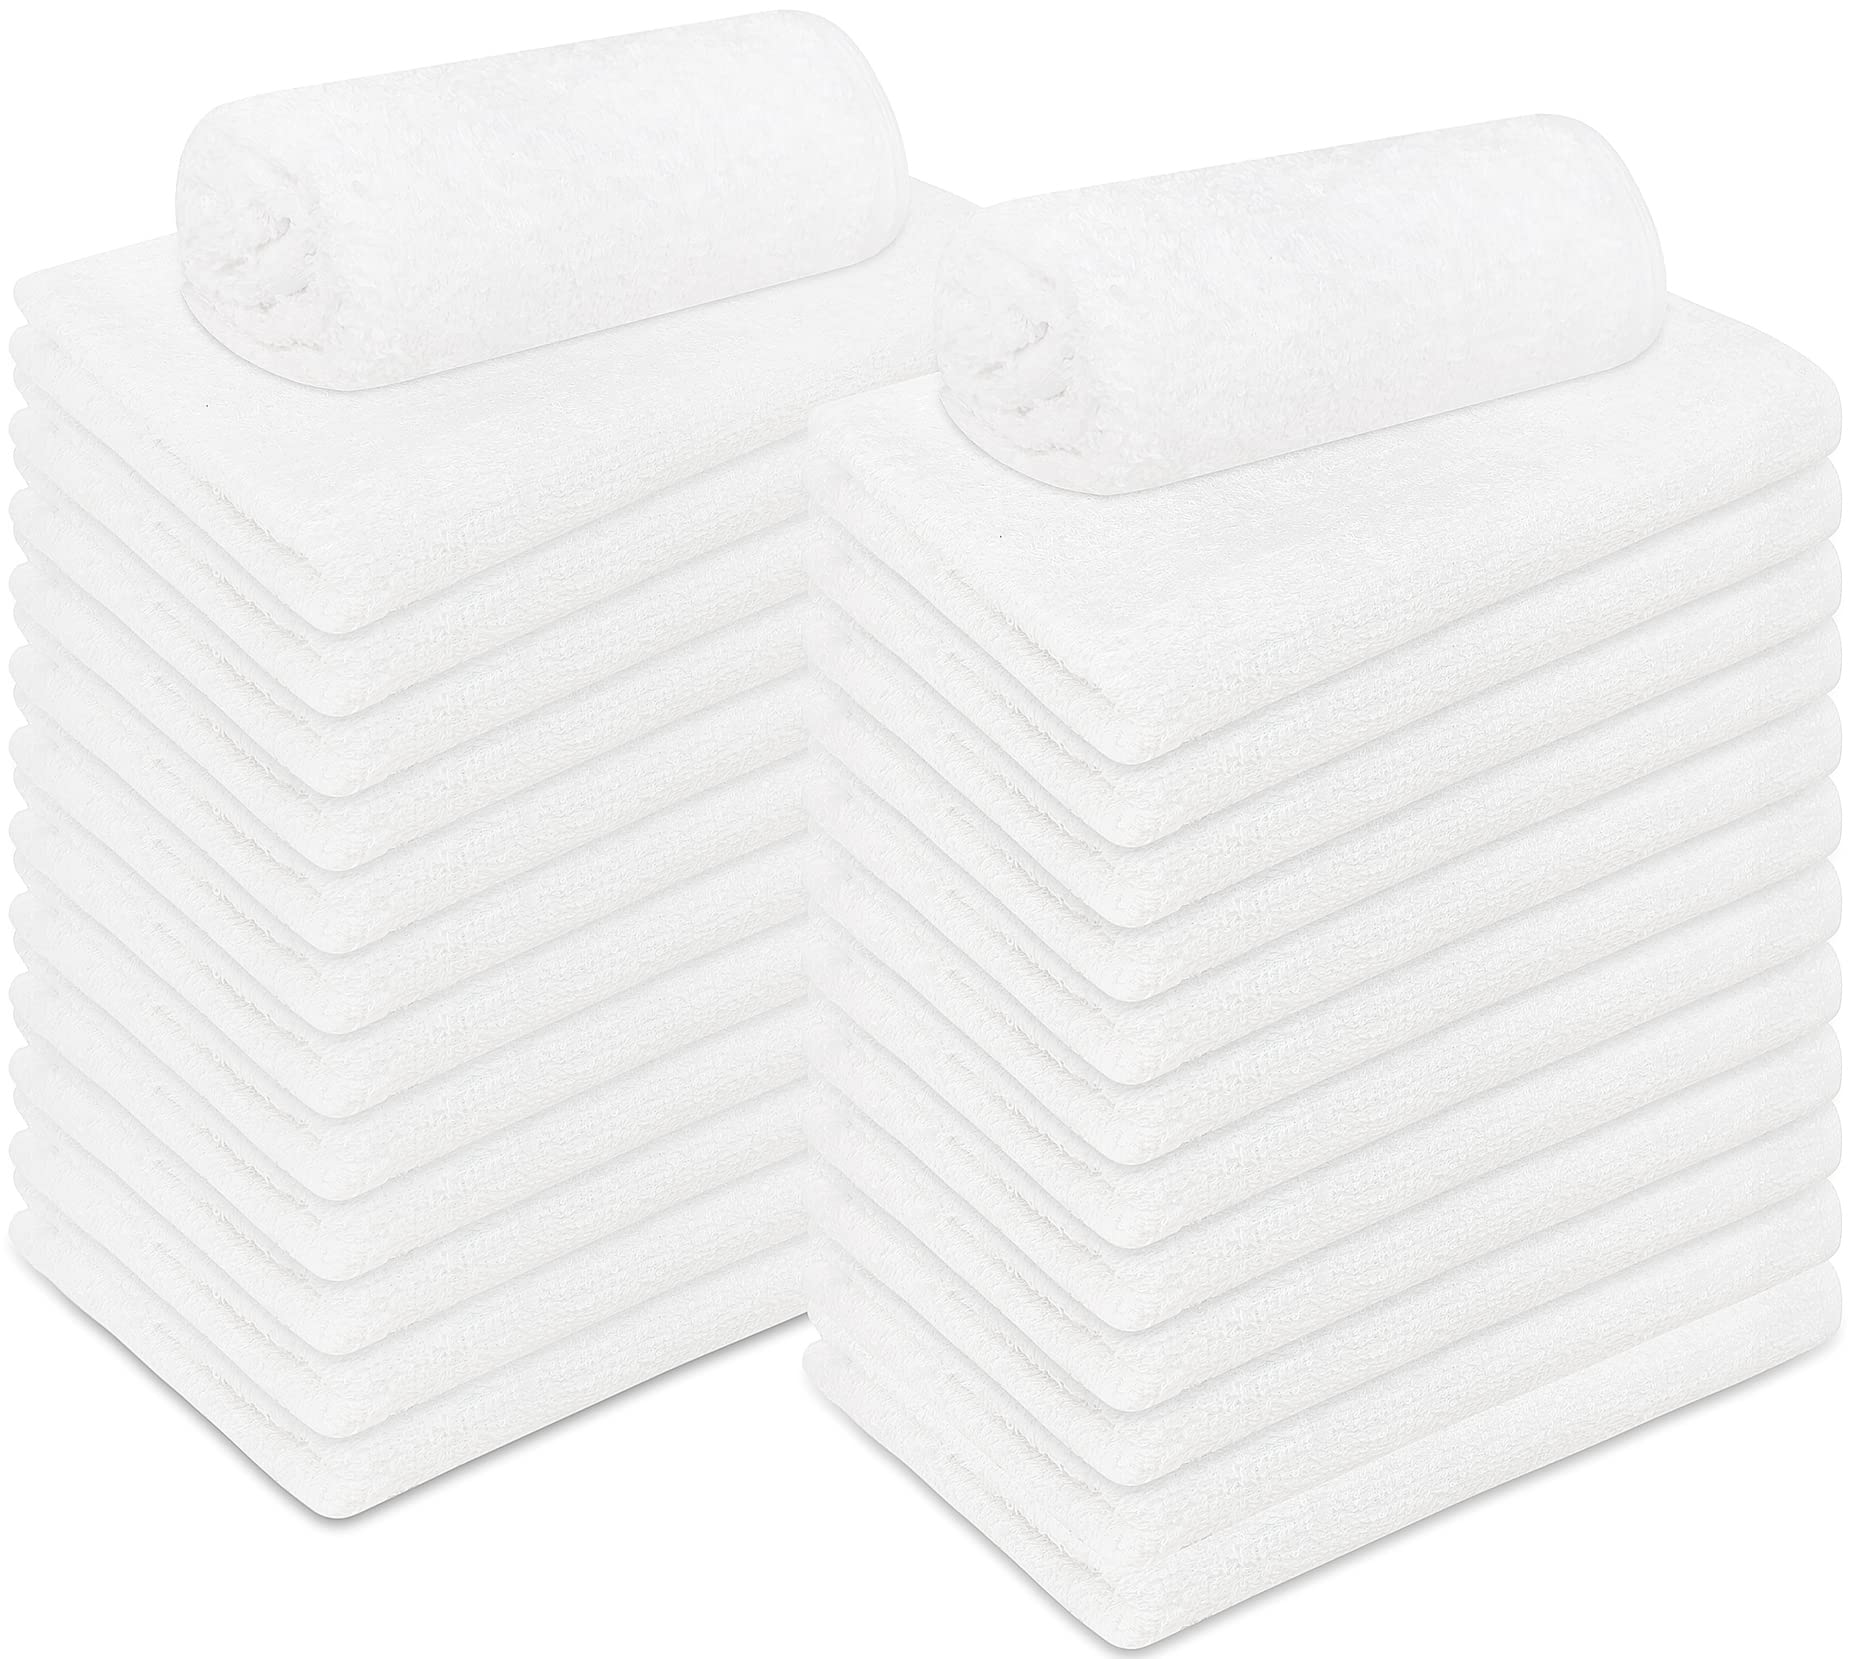 Pacific Linens 16x27-Inch Hand Towels 24 Bulk Pack White, Super